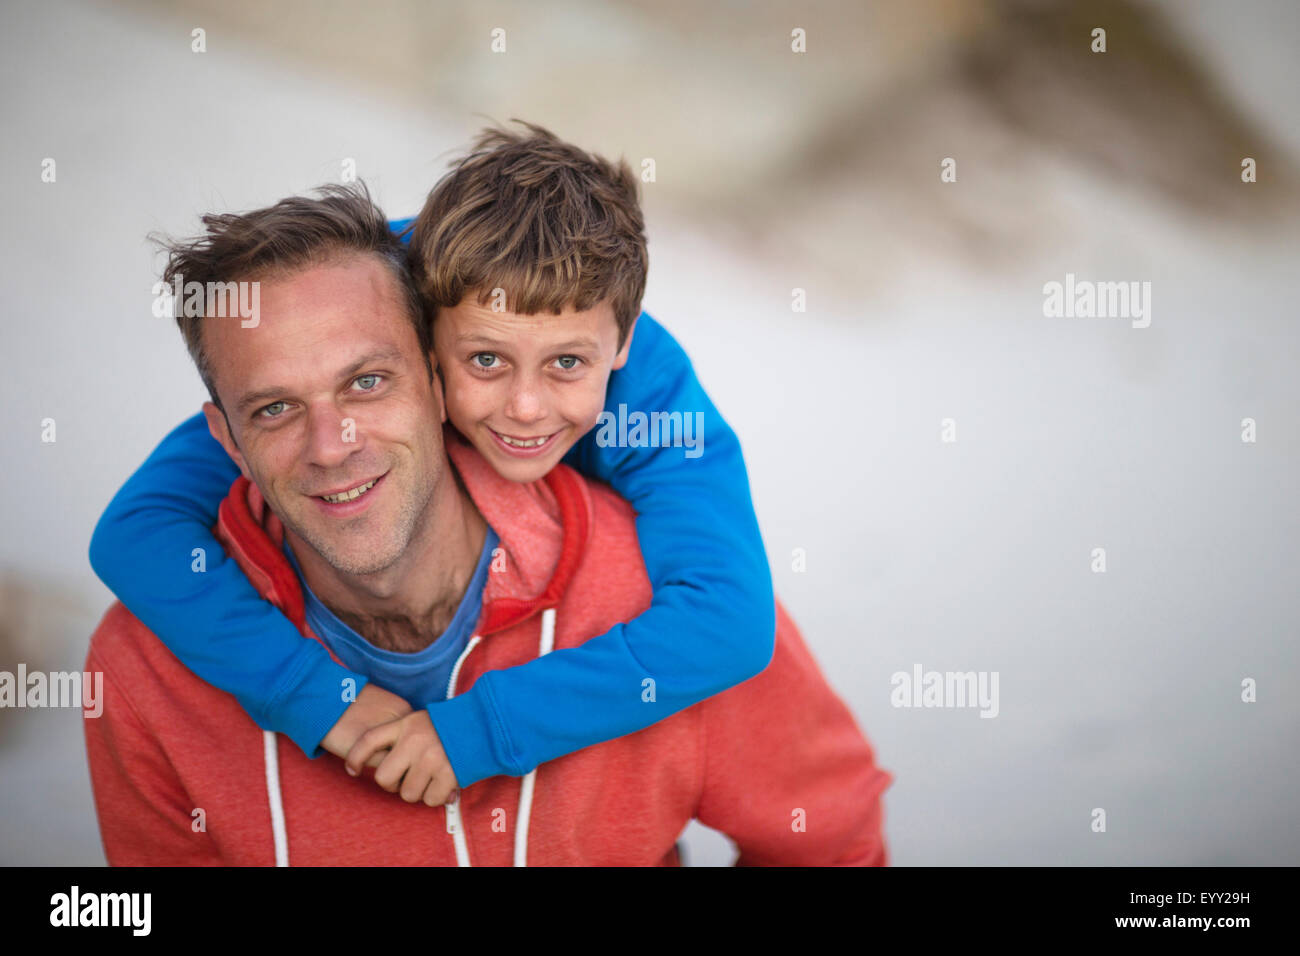 Woman carrying son piggyback outdoors Banque D'Images